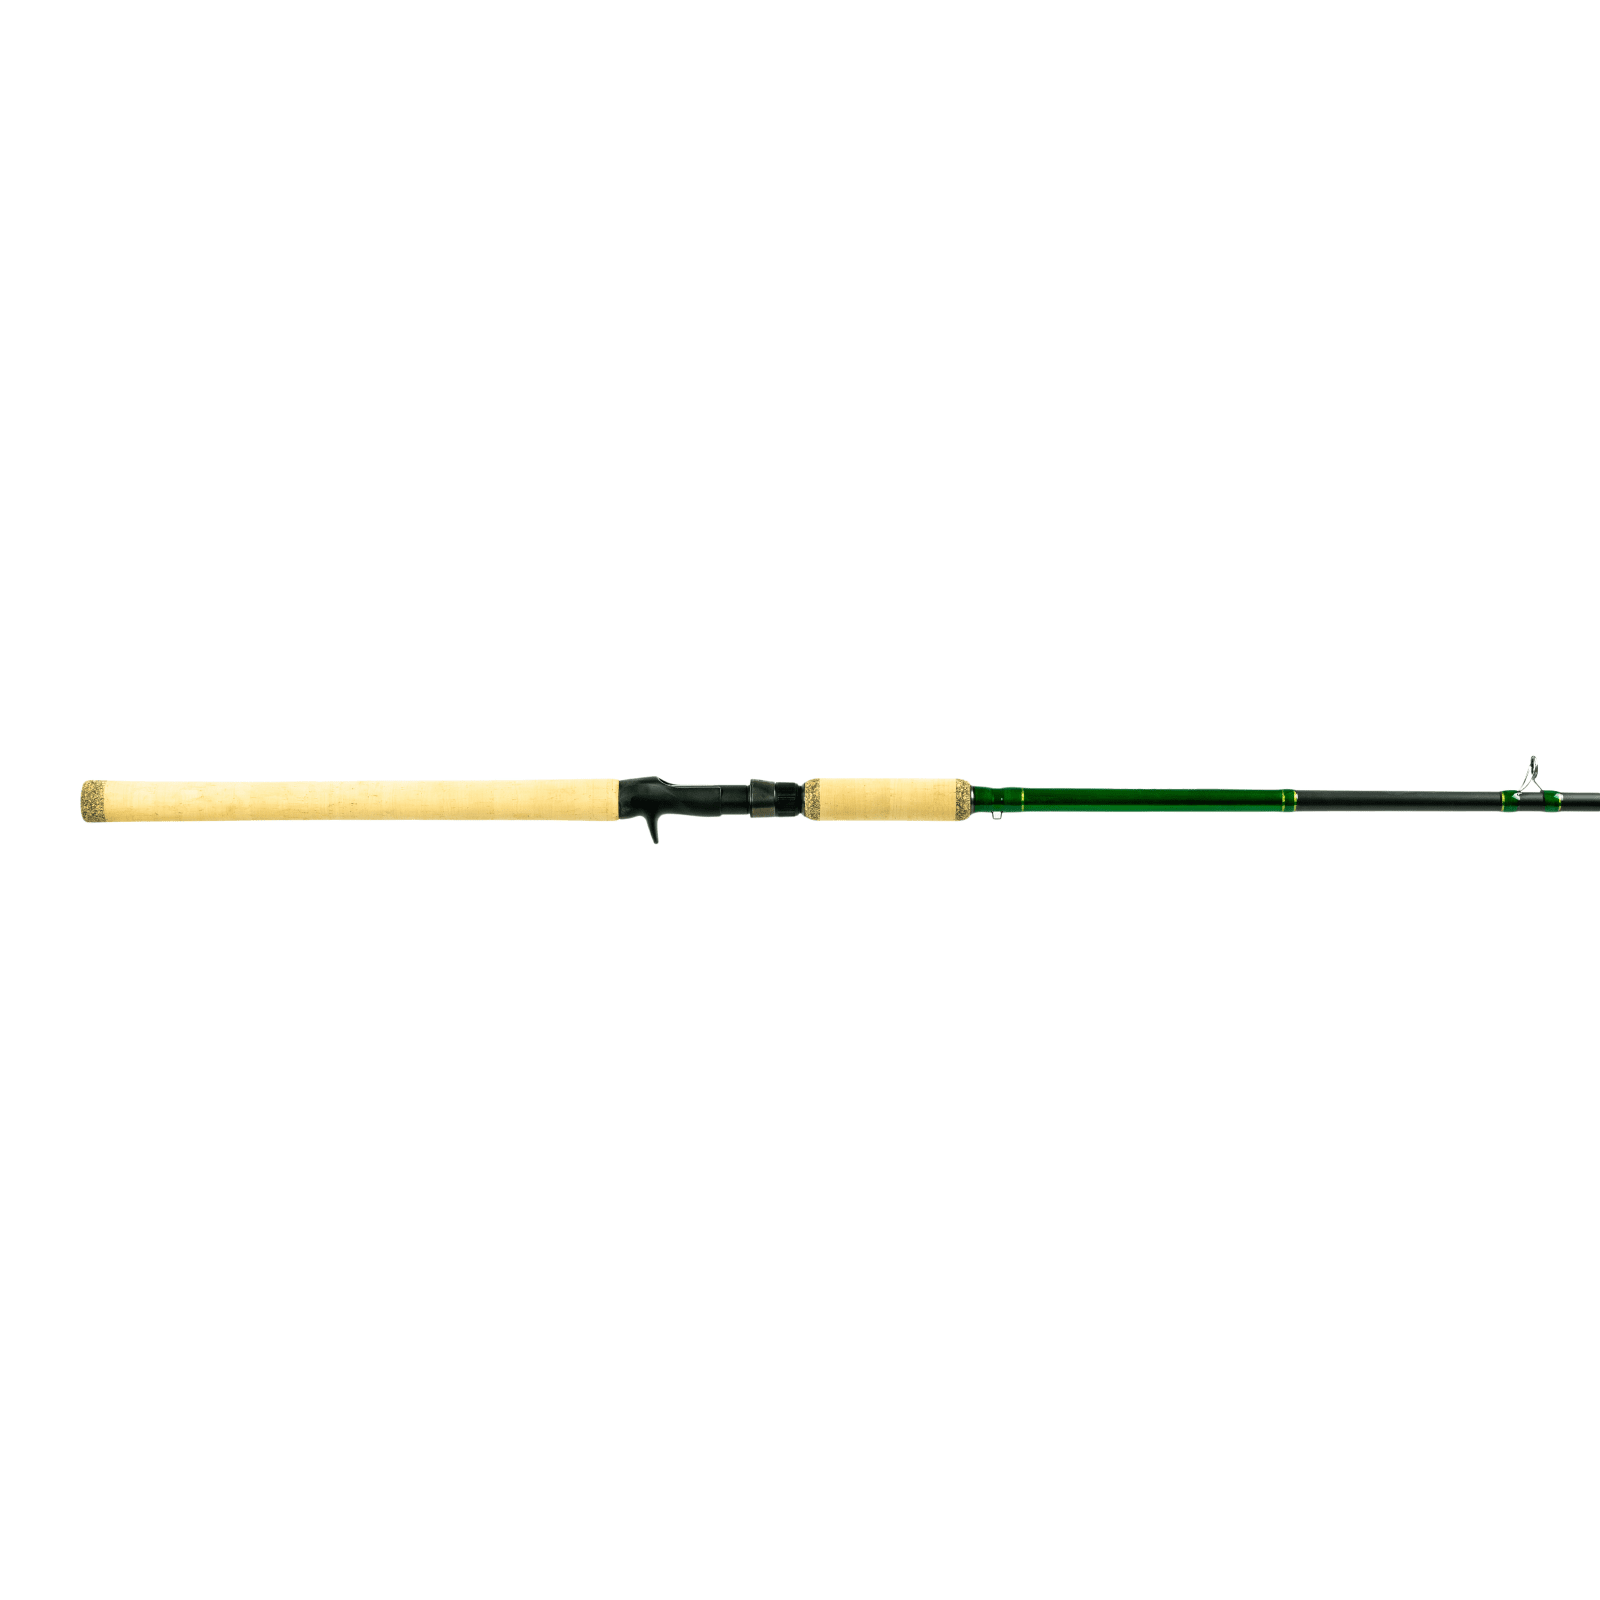 8 ft. XH Compre Muskie Casting Rod by Shimano at Fleet Farm